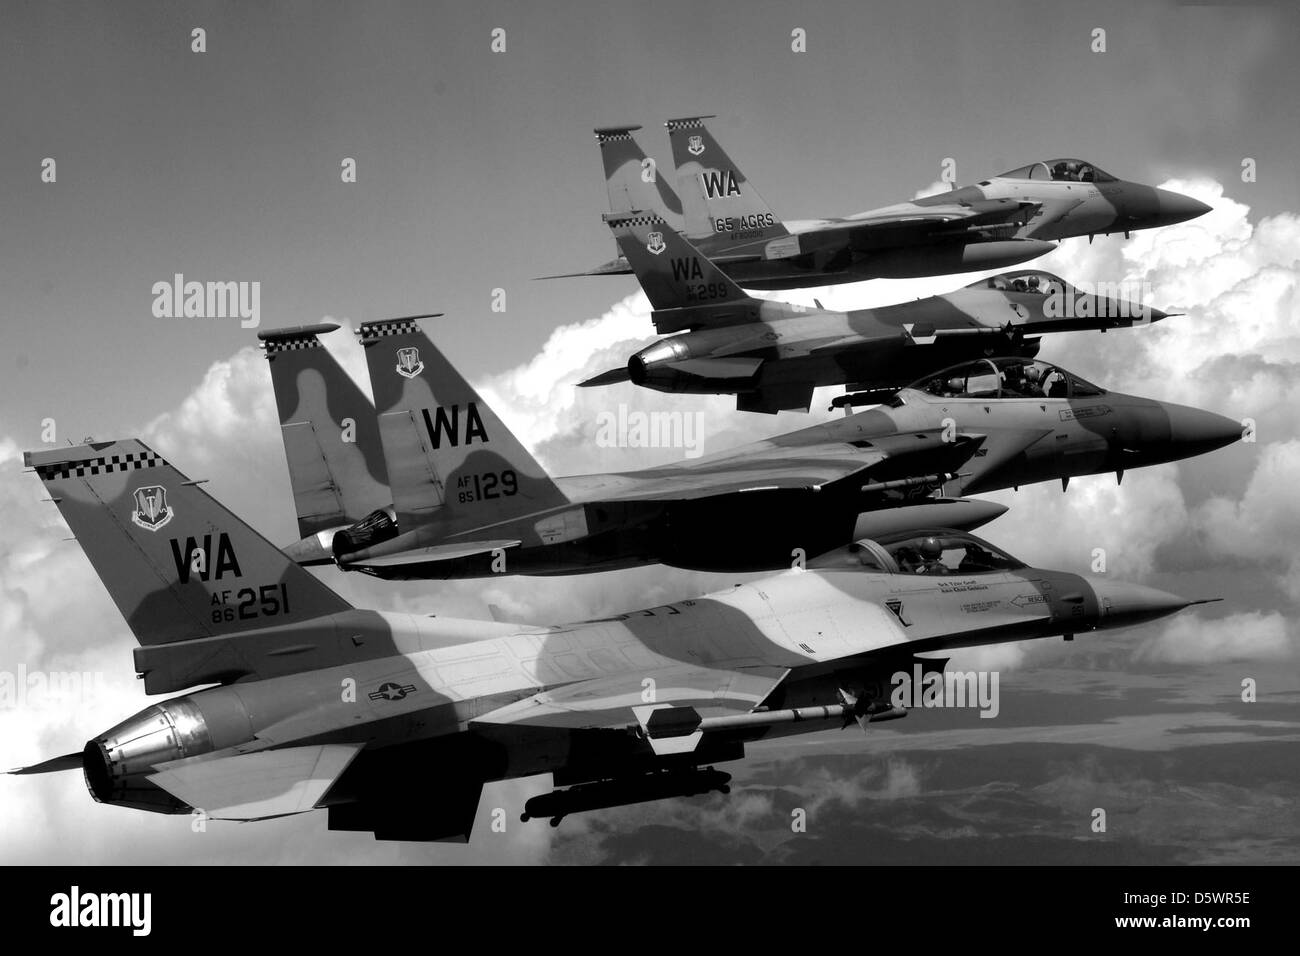 McDonnell Douglas F-15 "Eagles" and F-16 "Fighting Falcons" of the 64th and 65th Aggressor Squadron's at Nellis AFB. Stock Photo